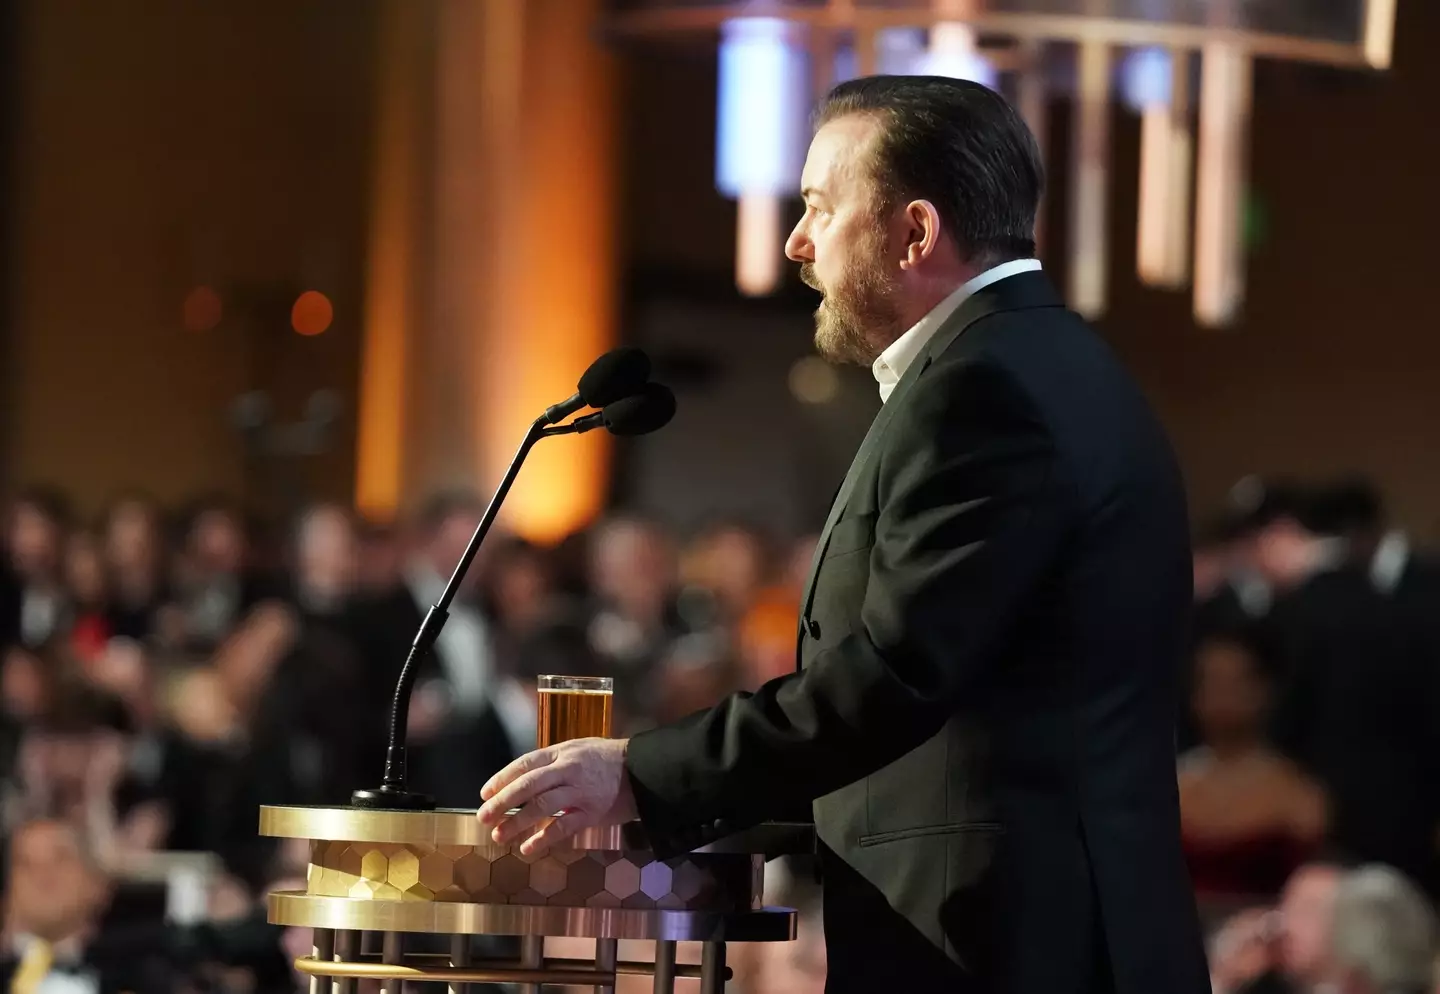 Ricky Gervais last hosted the Golden Globes in 2020.